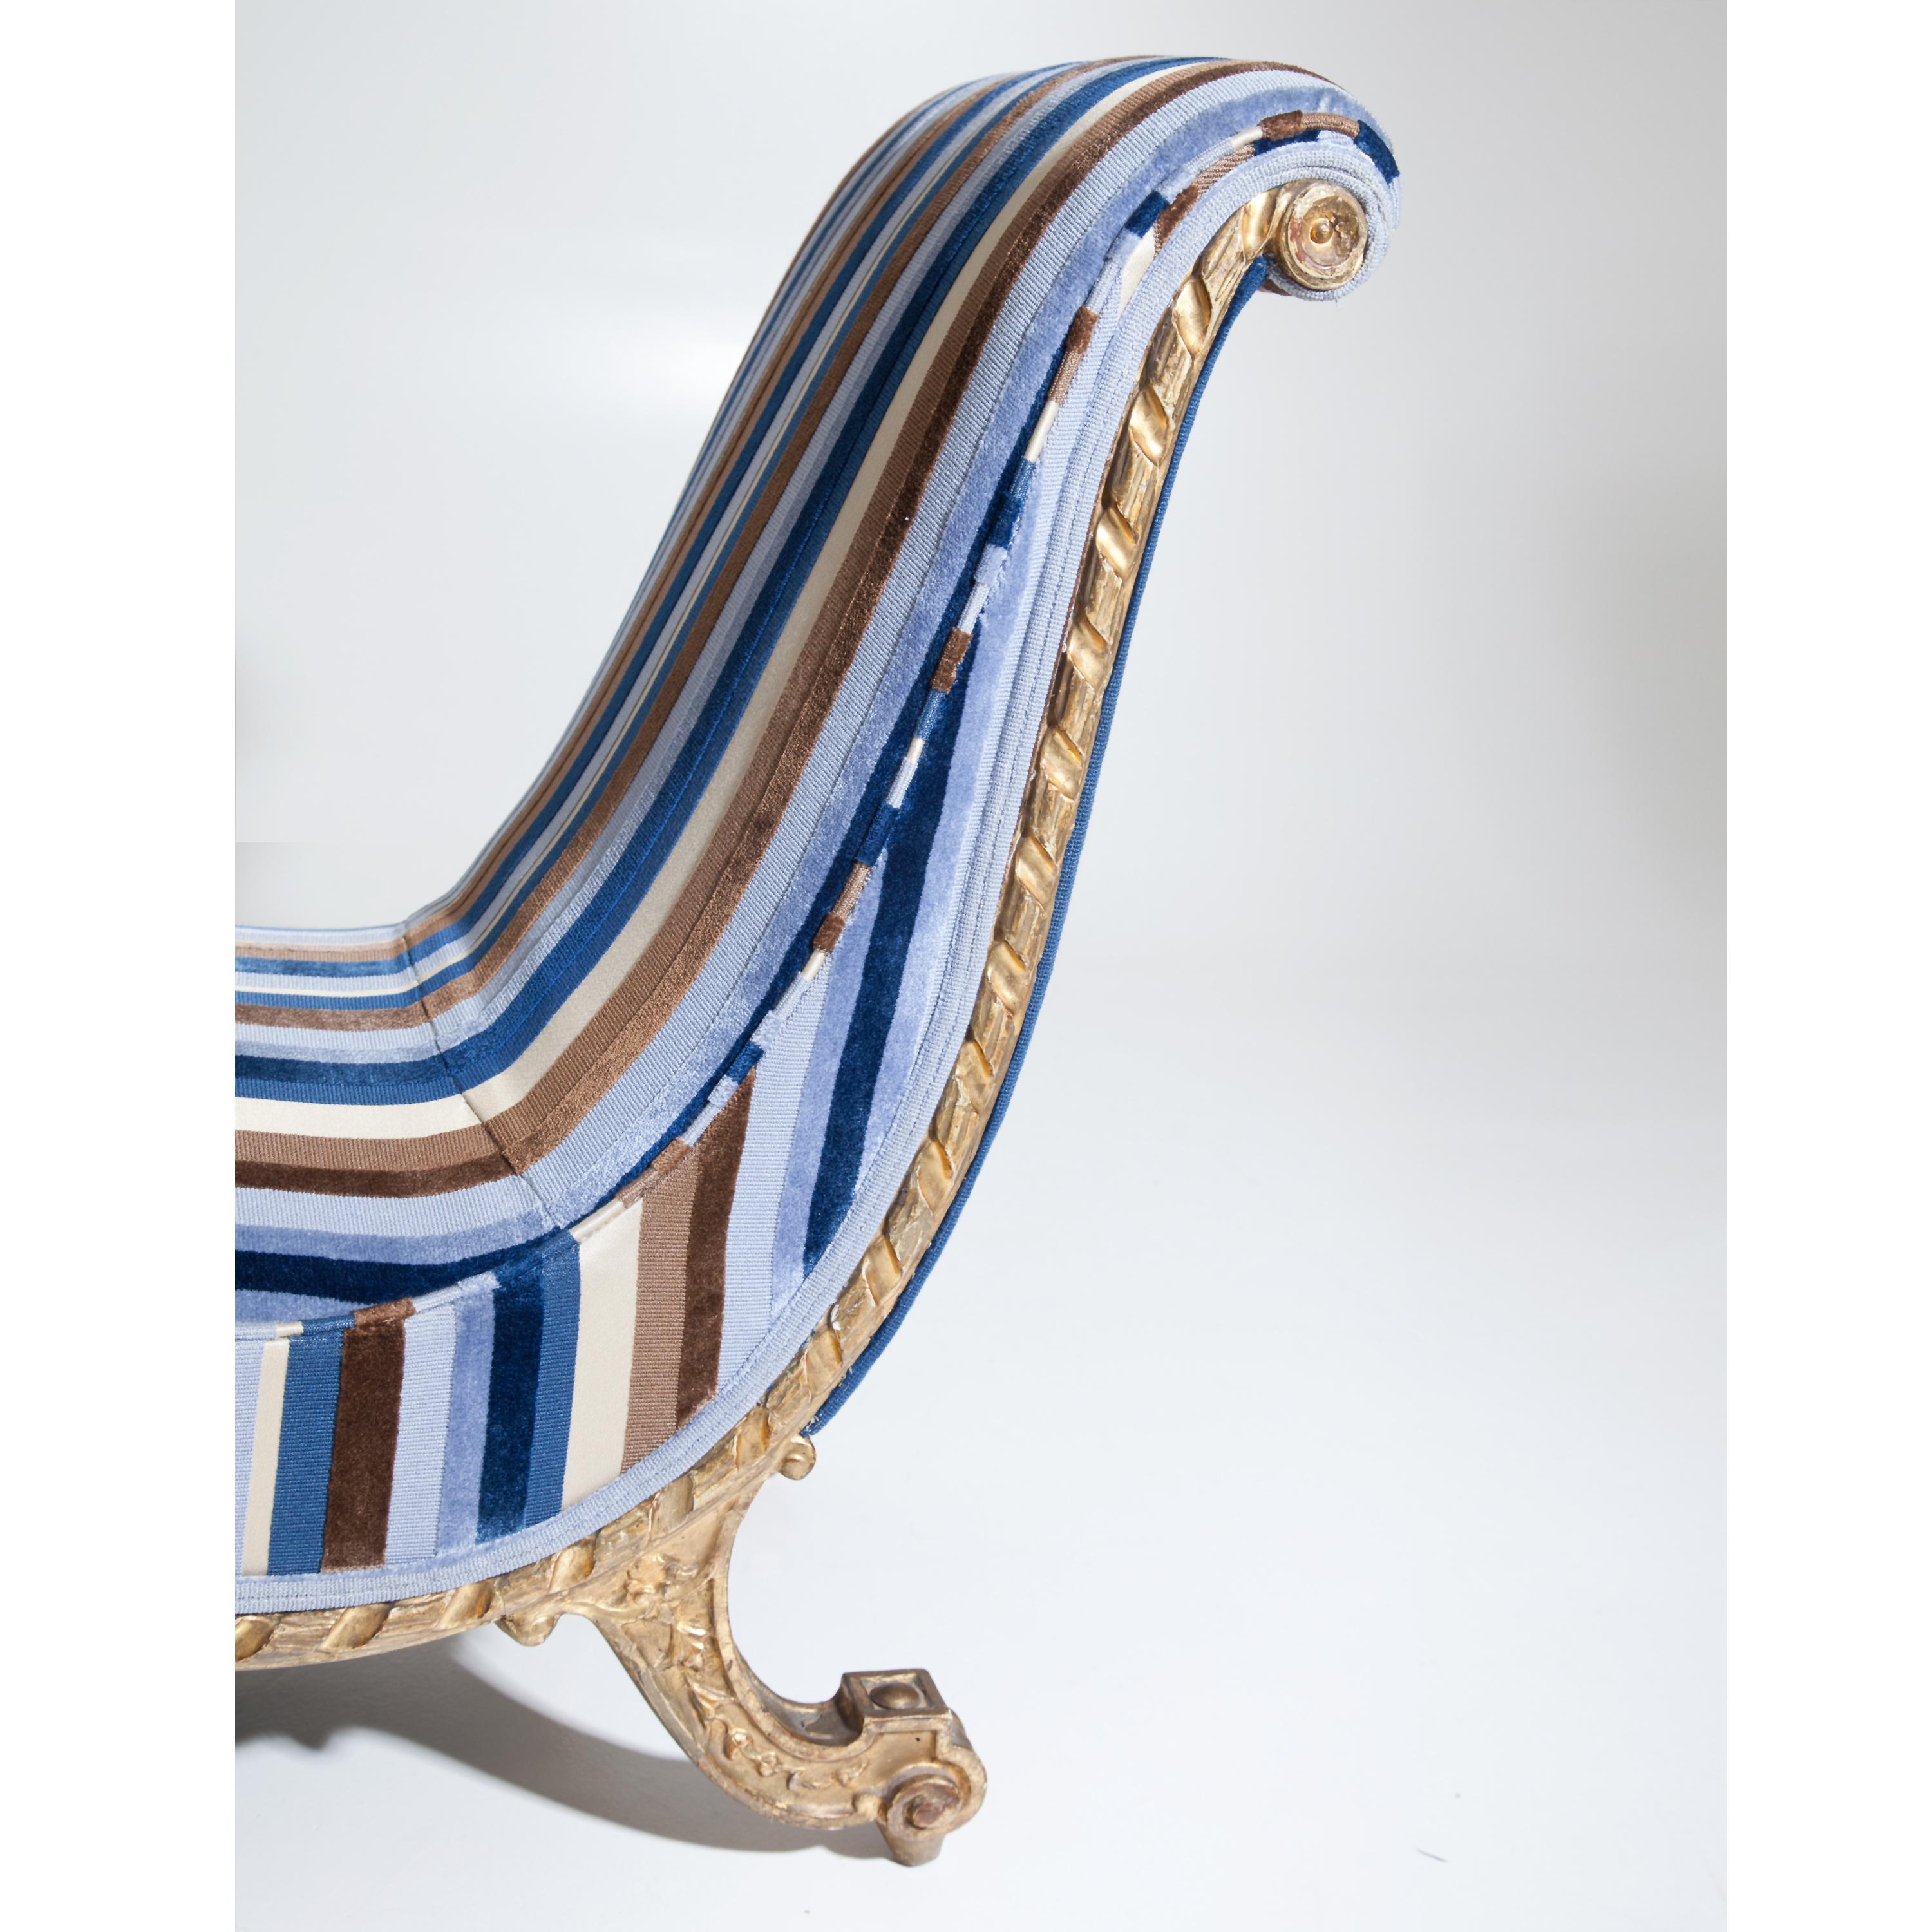 Early 19th Century Gilt Lounge Chair, Italy/Lucca, circa 1825-1830